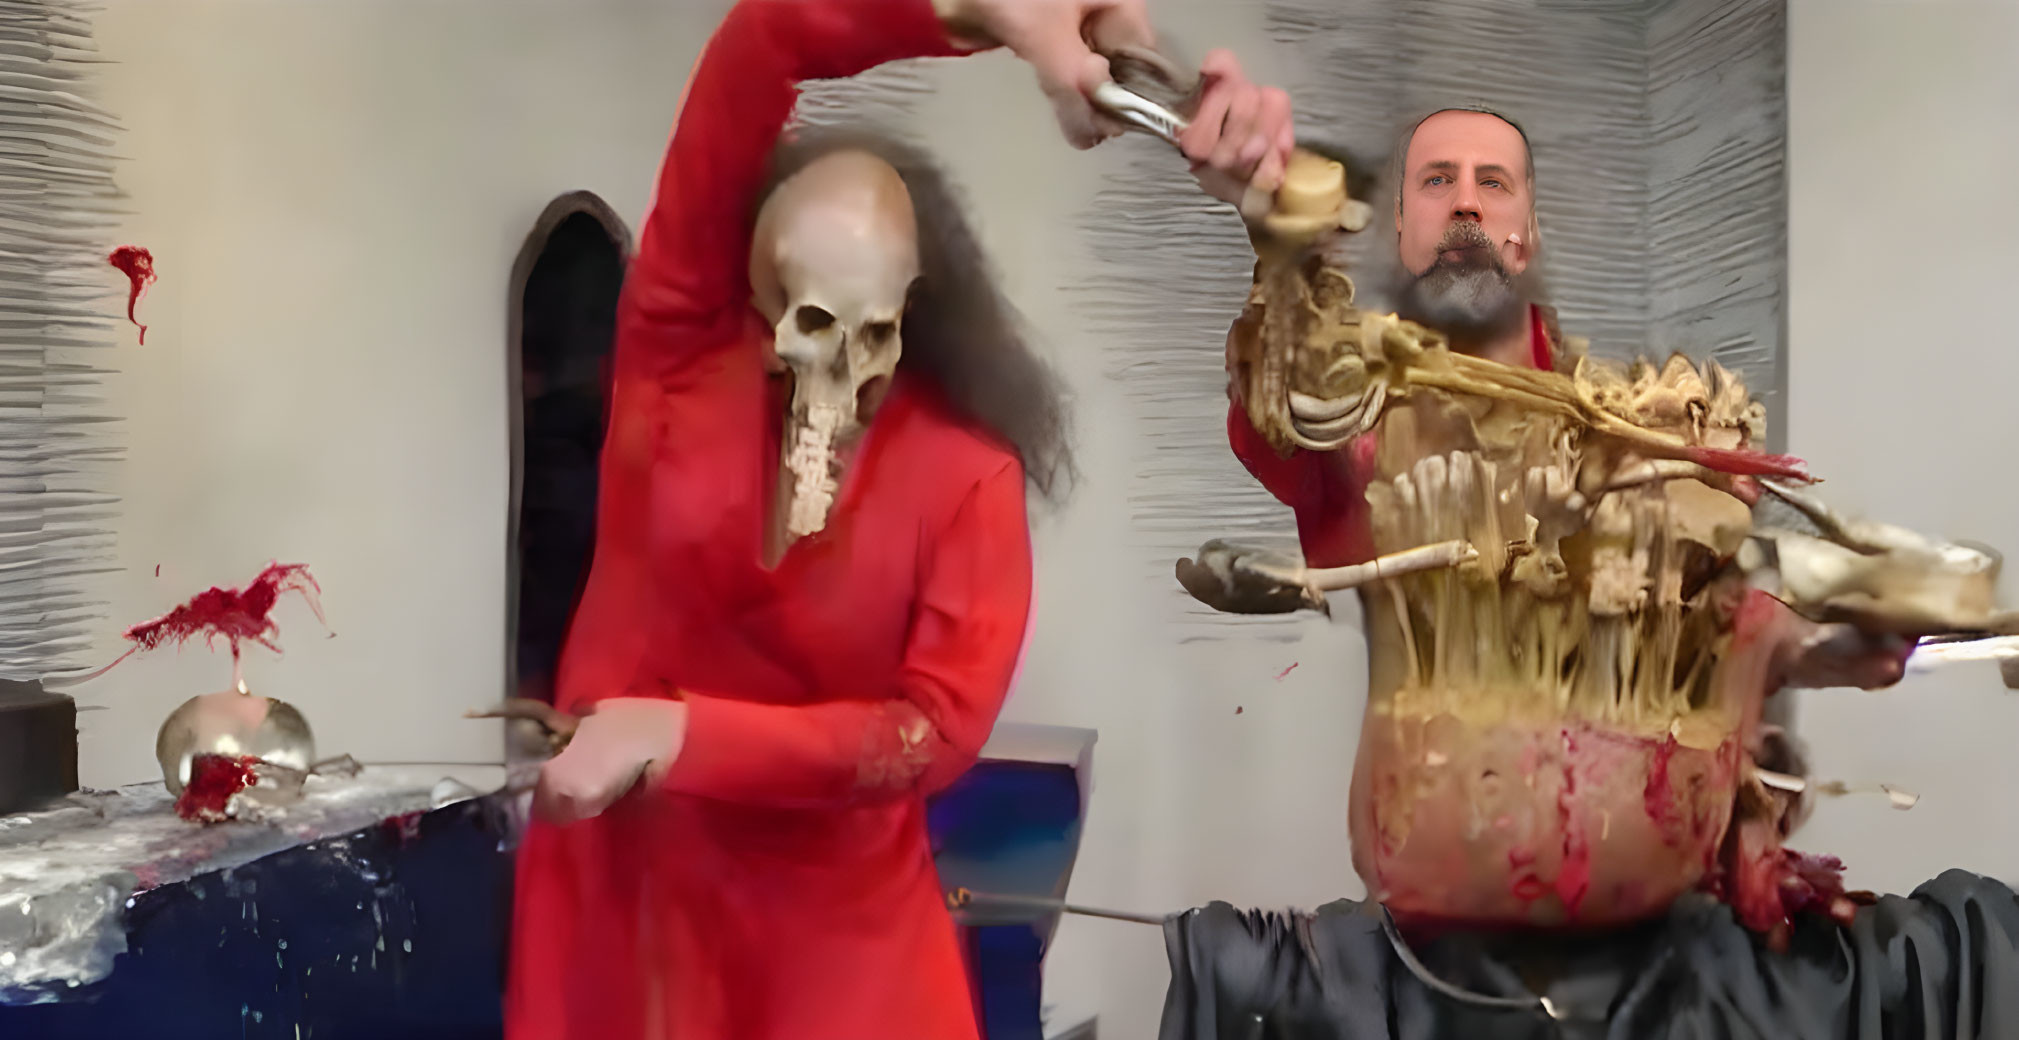 Red-robed figure smashes skeletal form with a hammer